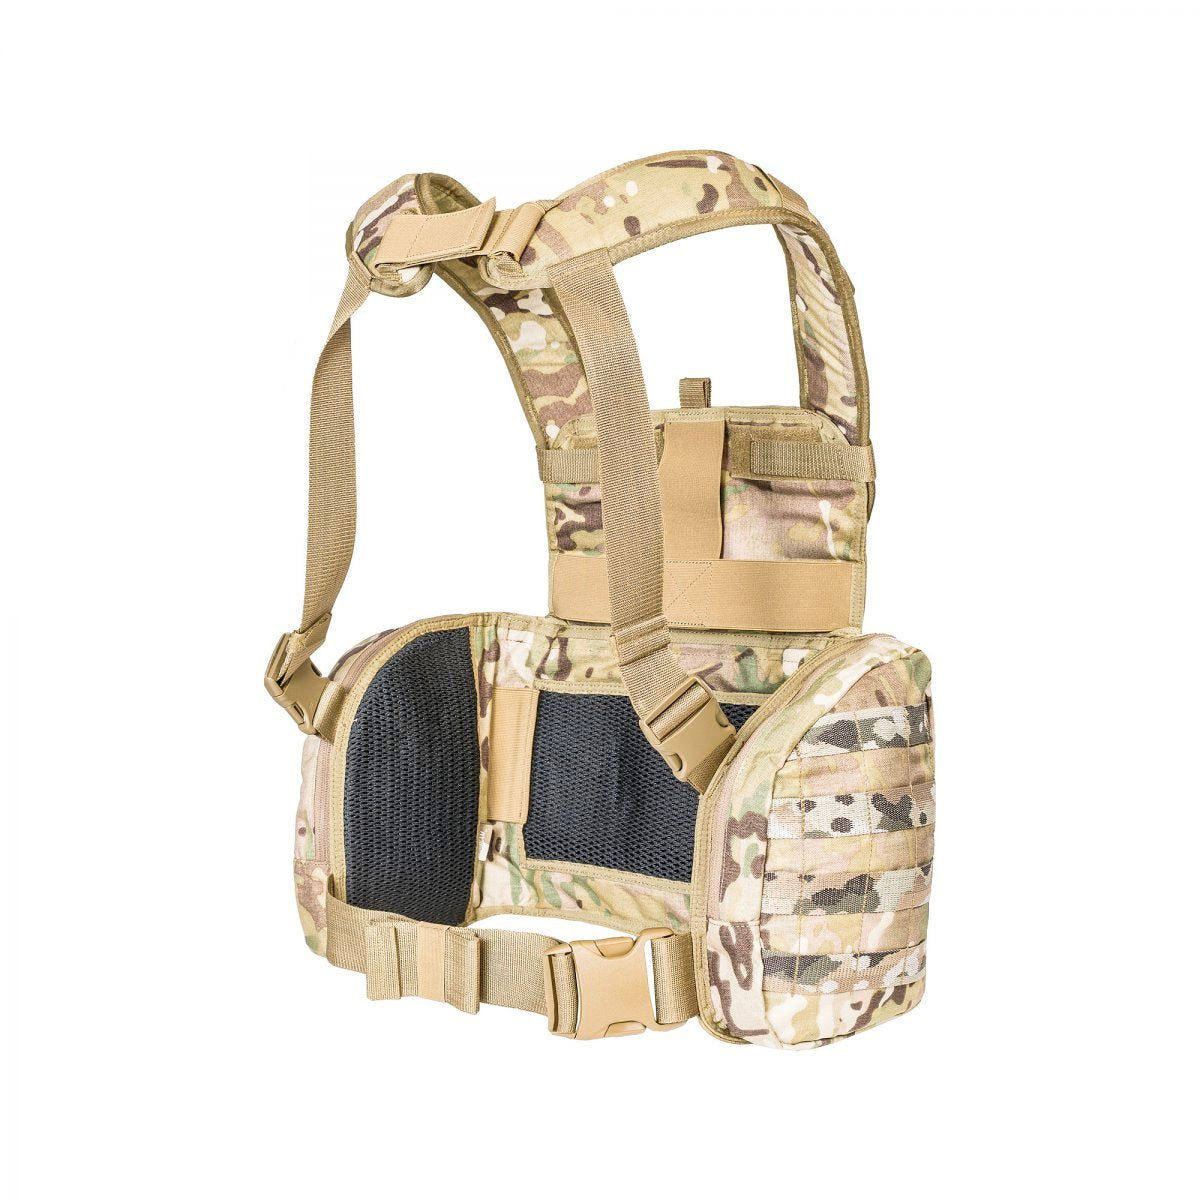 Tasmanian Tiger Chest Rig MKII Harness with Side Pockets MultiCam Accessories Tasmanian Tiger Tactical Gear Supplier Tactical Distributors Australia